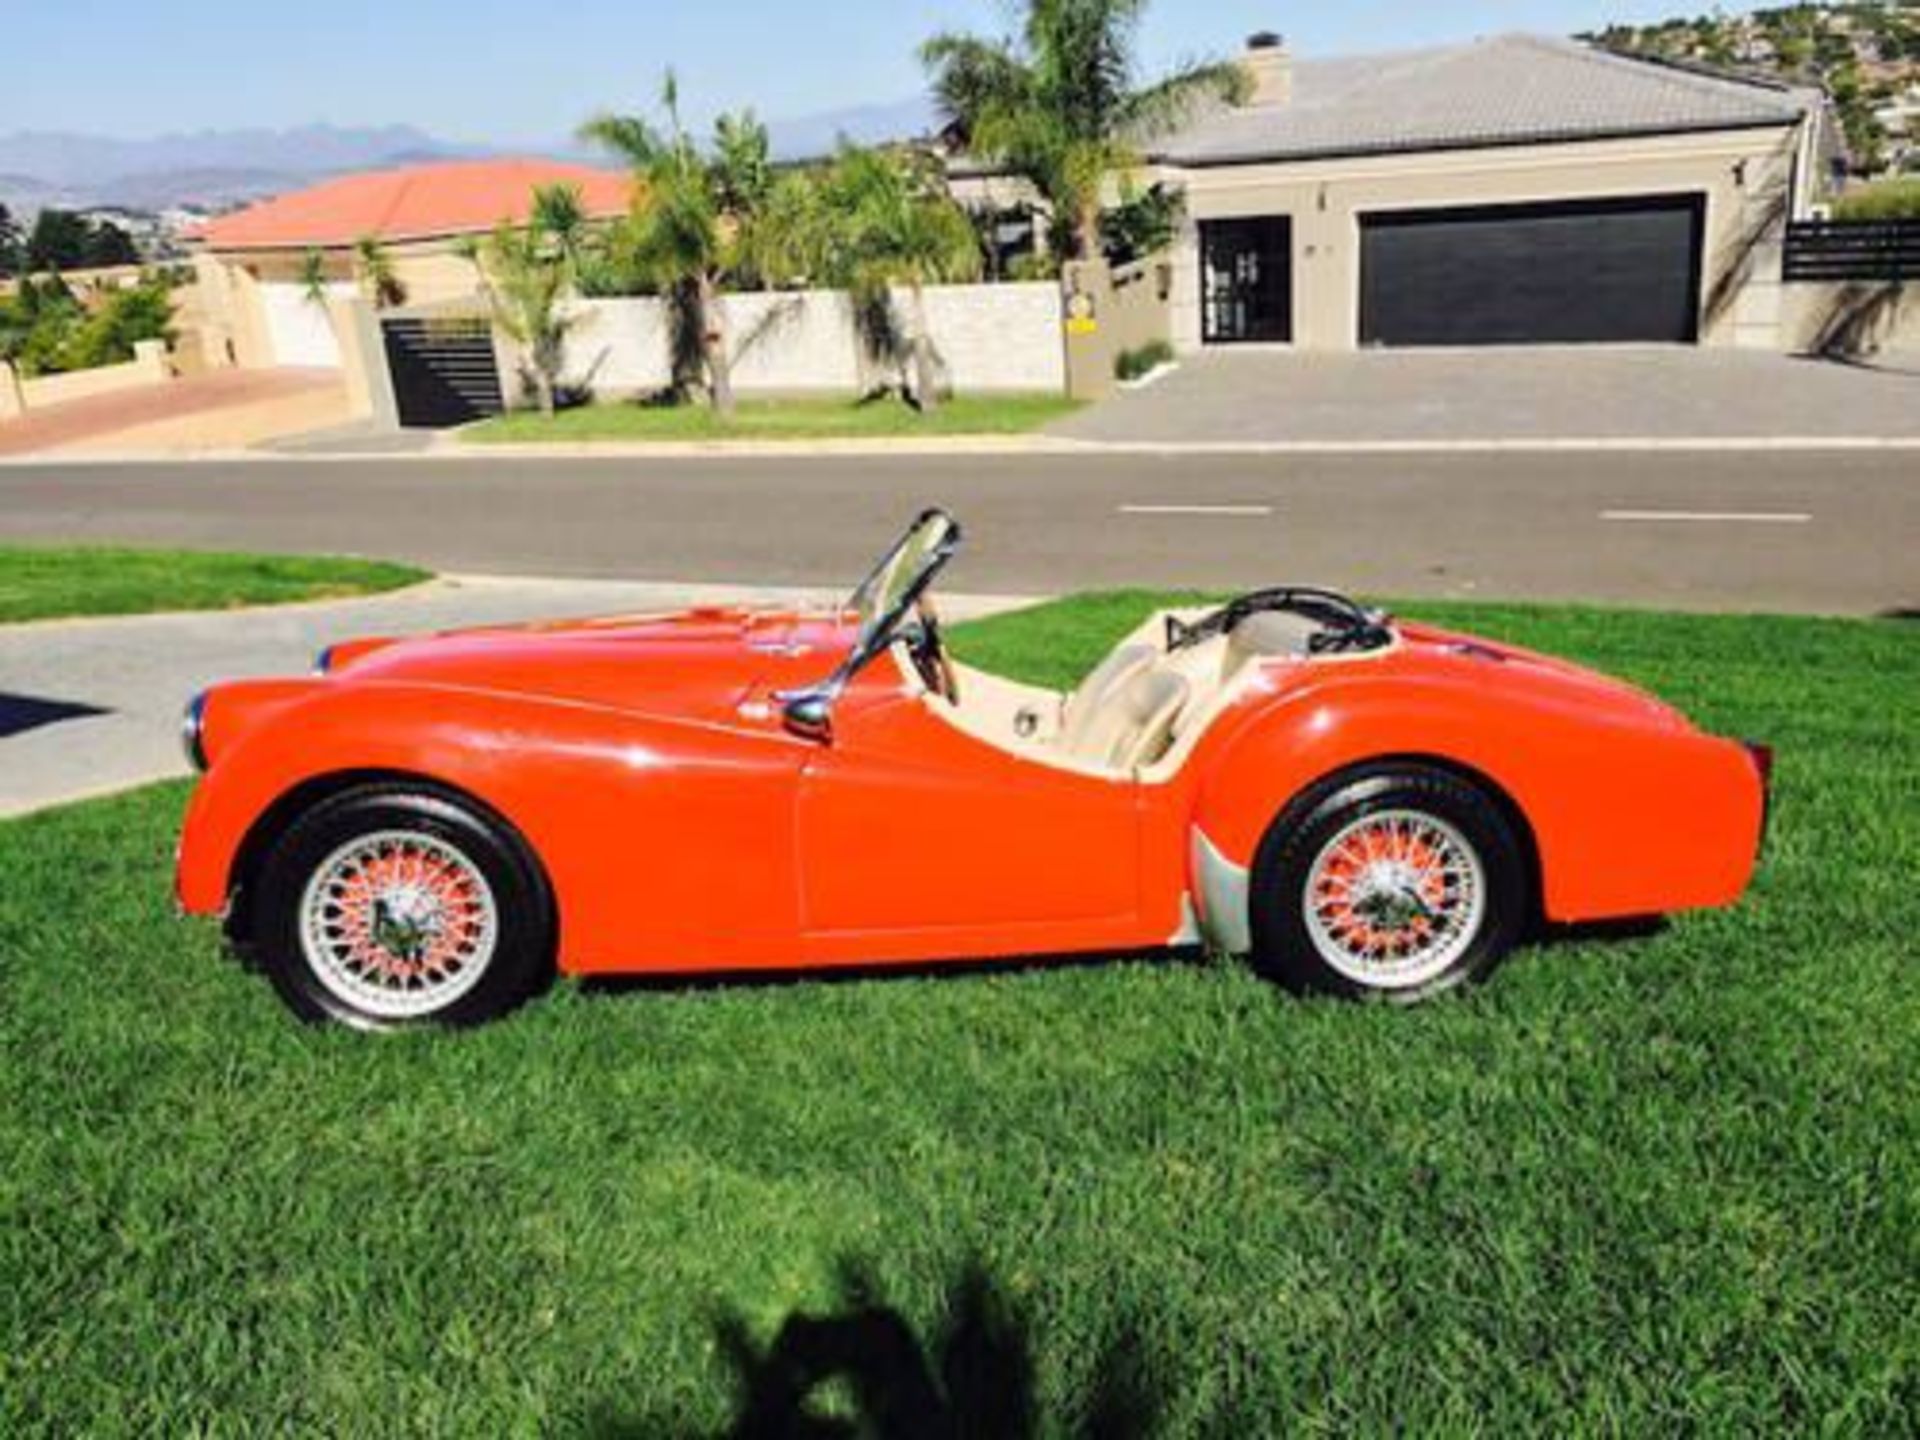 1954 Triumph TR2 Roadster Complete With Hard Top {053693} - Image 5 of 18